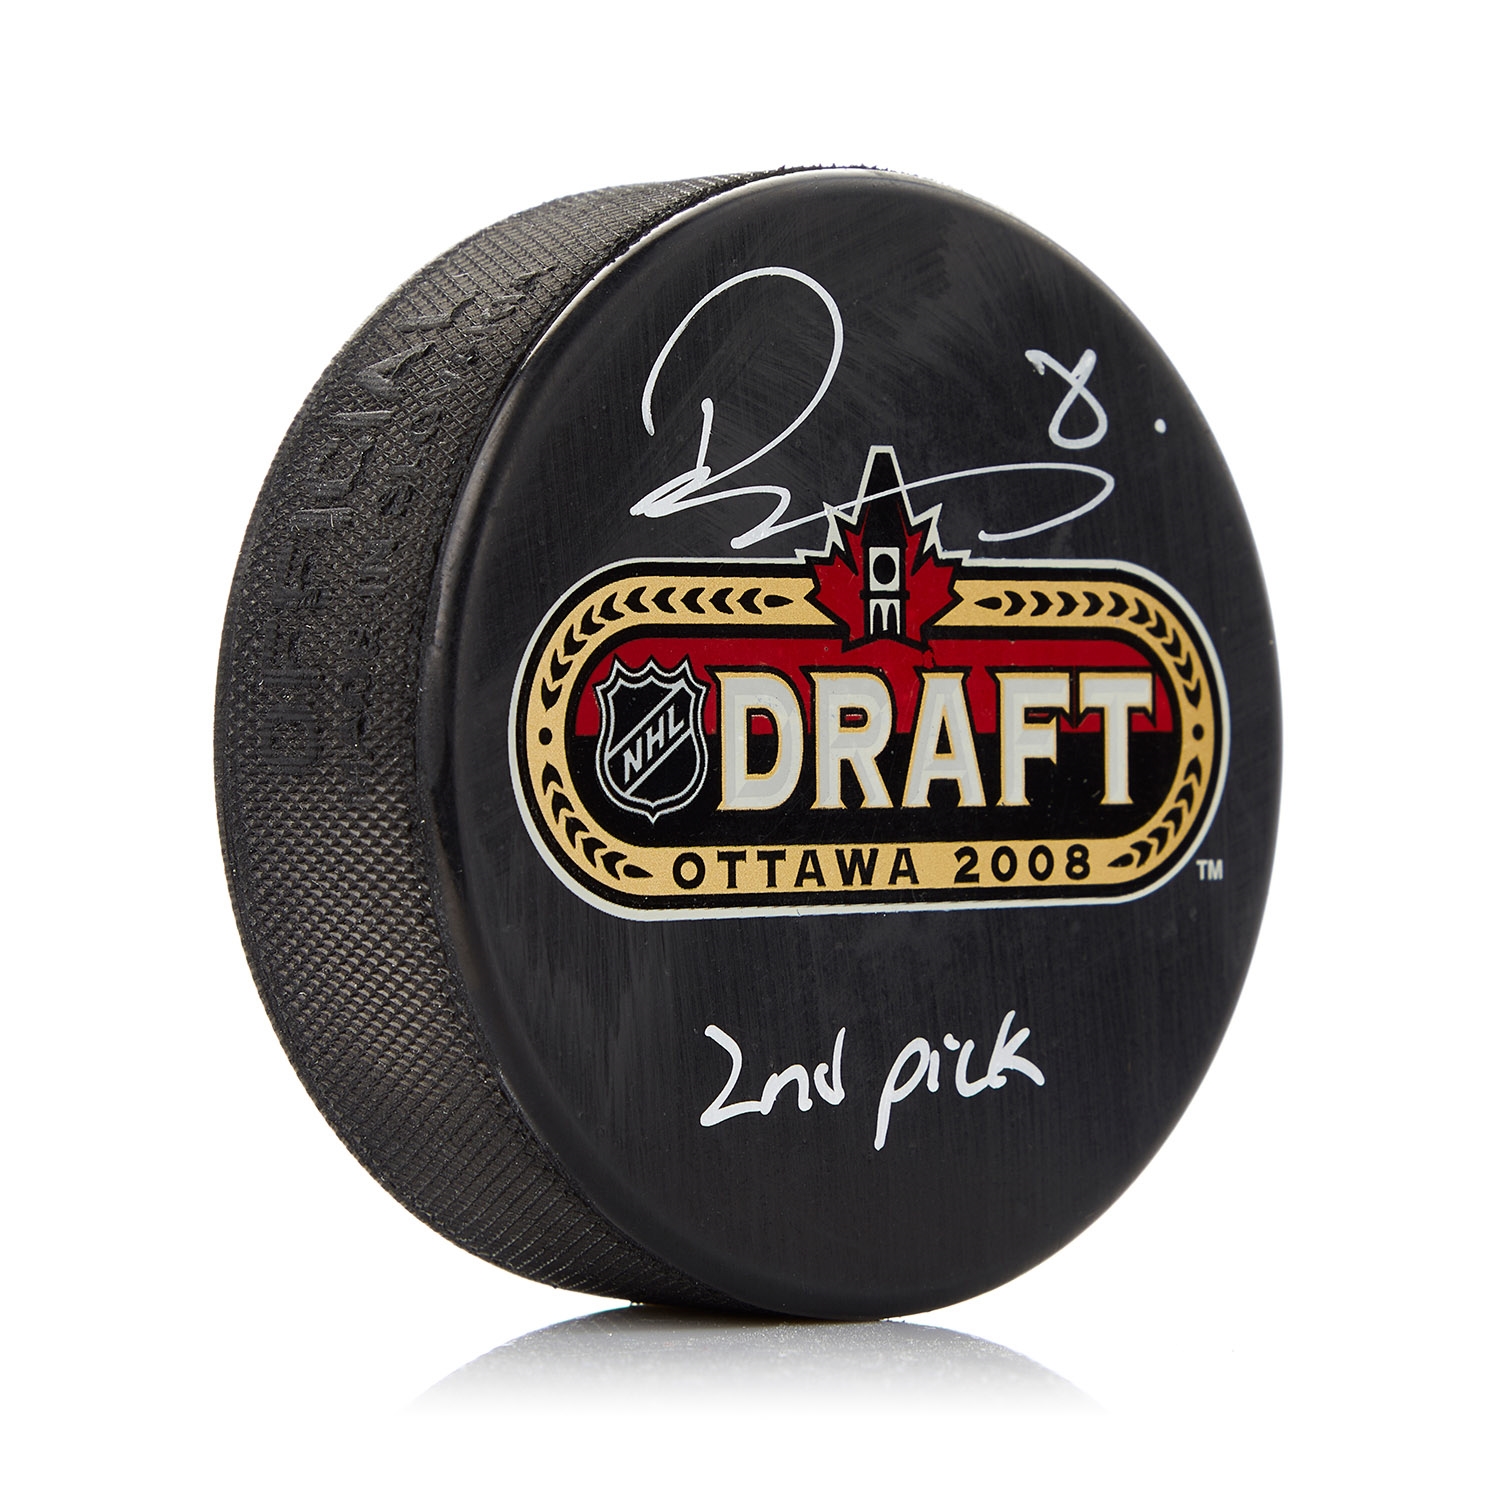 Drew Doughty Signed 2008 NHL Entry Draft Puck with 2nd Pick Note